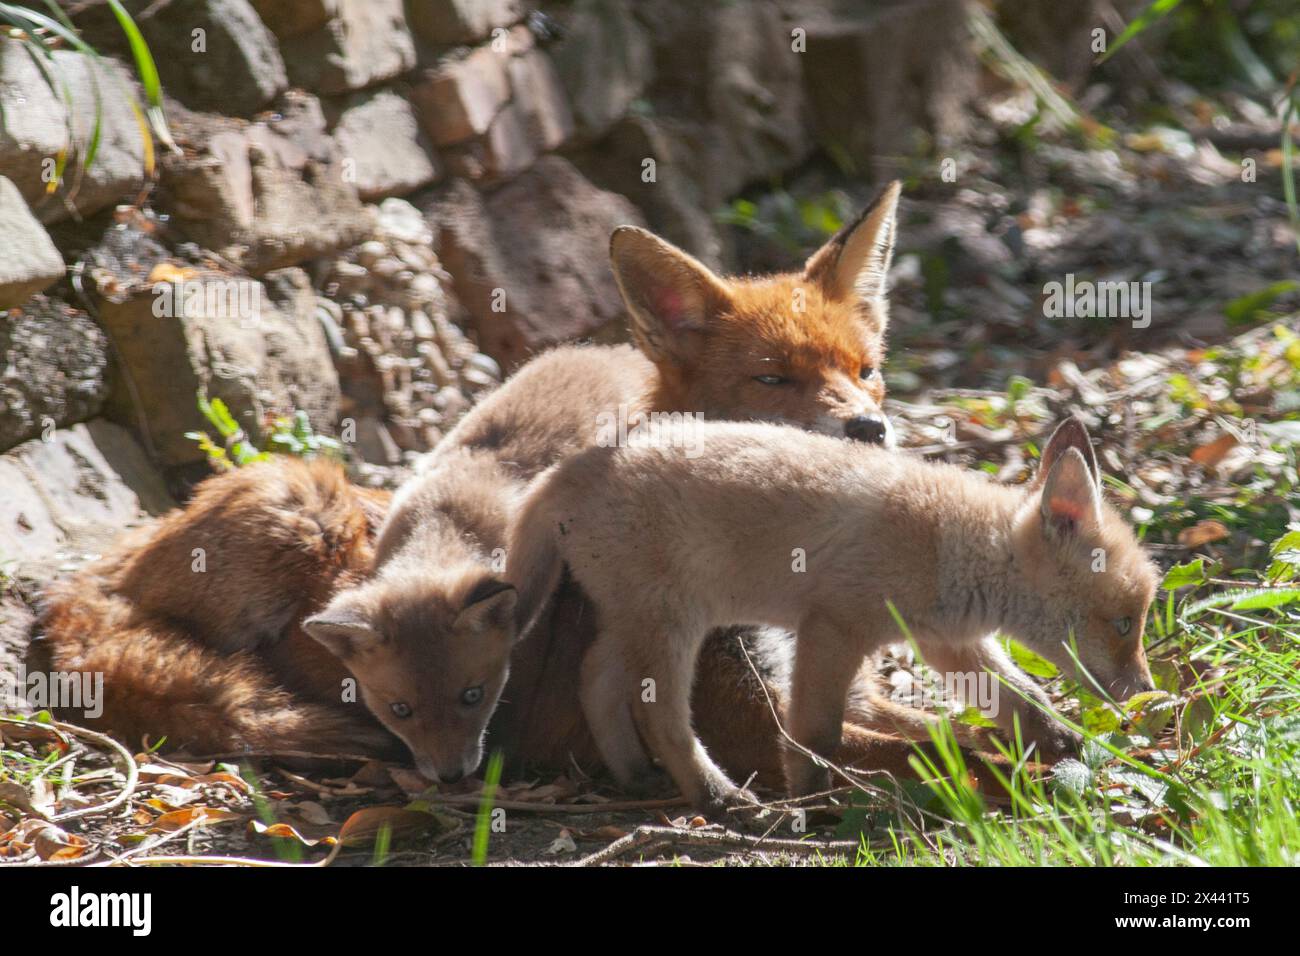 UK weather, London, 30 April 2024: Warmer temperatures and sunny weather make it feel like spring in London. Taking advantage of this, a family of fox cubs come out to play in a garden in Clapham, with their mother keeping a watchful eye nearby. The cubs are getting good at jumping, pouncing, chasing and fighting. Credit: Anna Watson/Alamy Live News Stock Photo